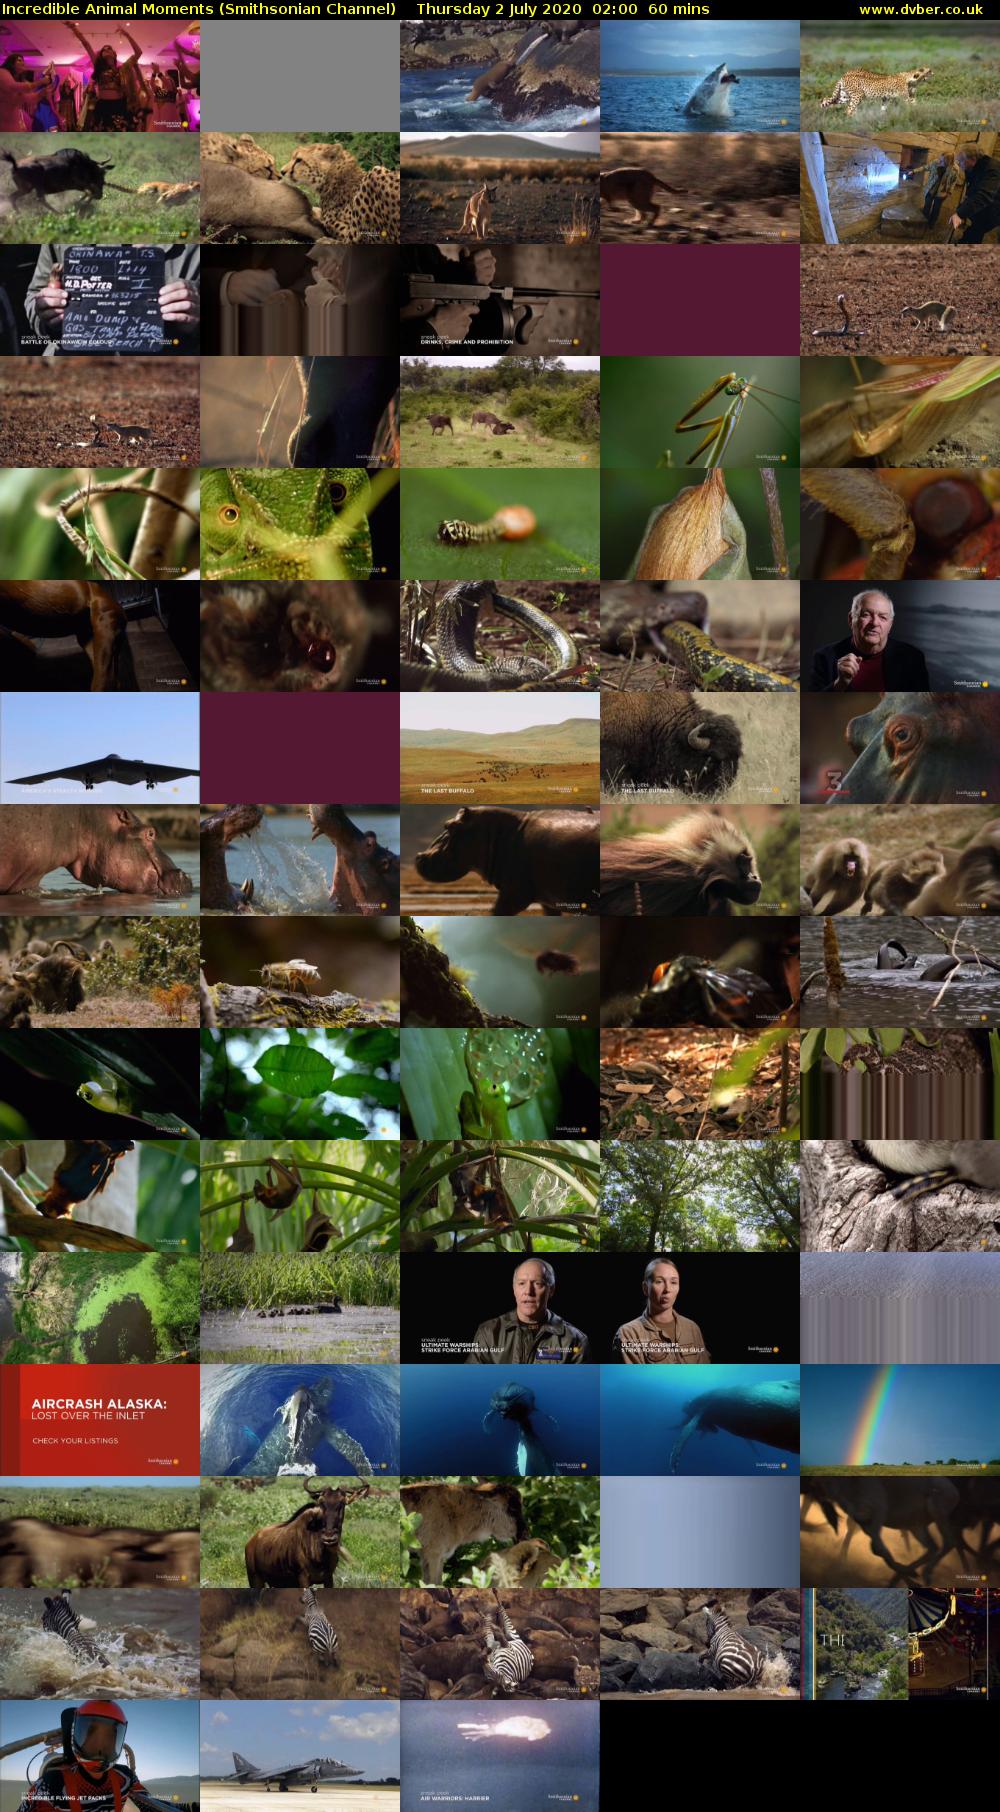 Incredible Animal Moments (Smithsonian Channel) Thursday 2 July 2020 02:00 - 03:00